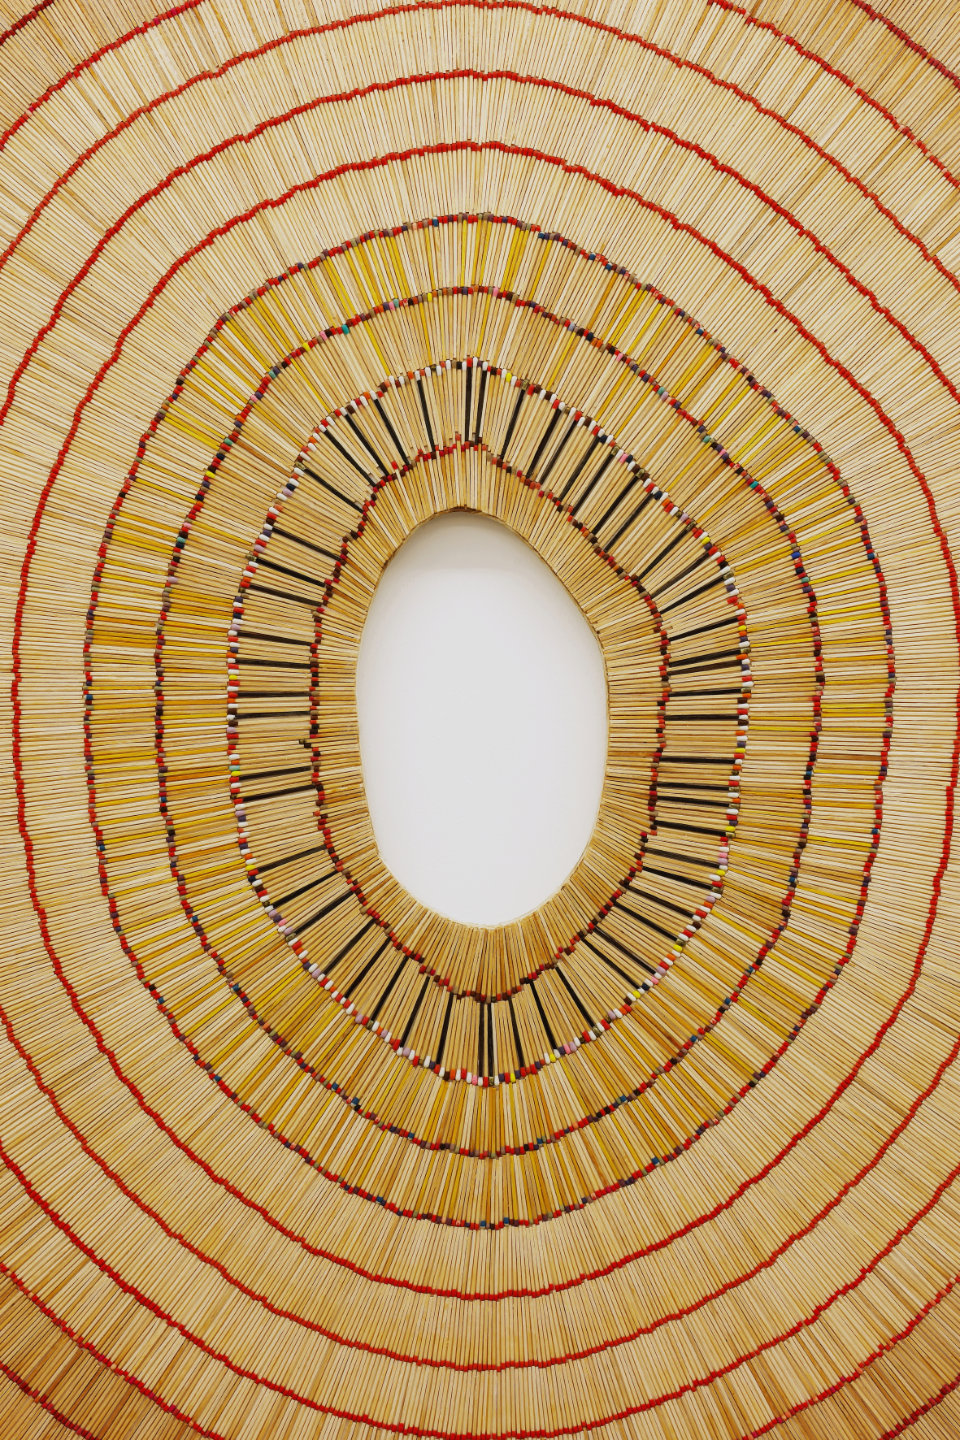 Alice Musiol - Ring of Fire - 2015